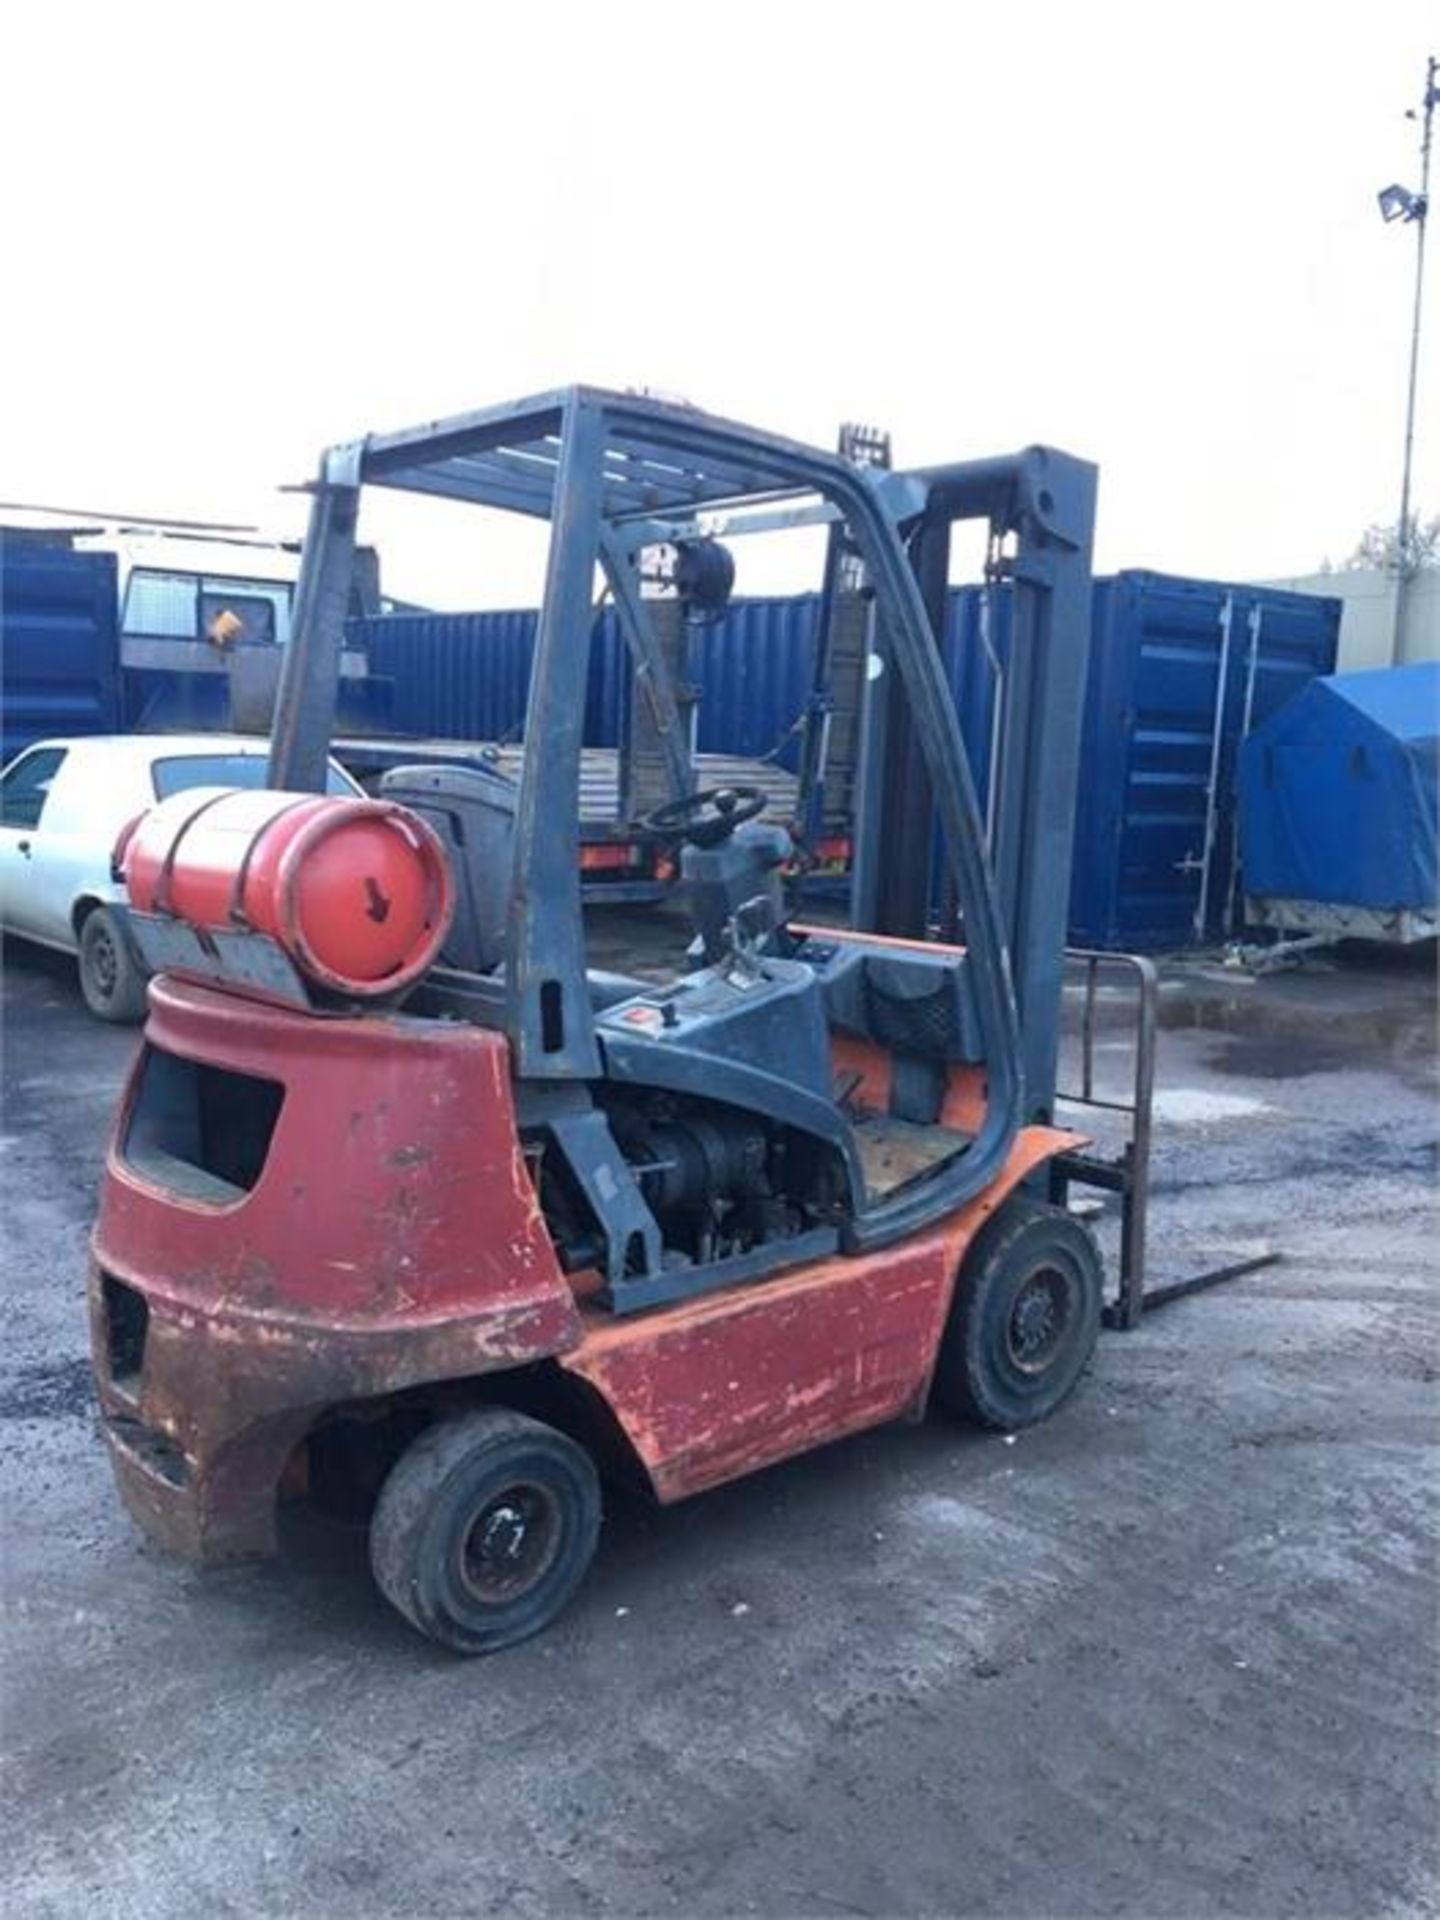 Boss CL16 Gas Forklift triple Freelift Mast Container Spec. - Image 6 of 6